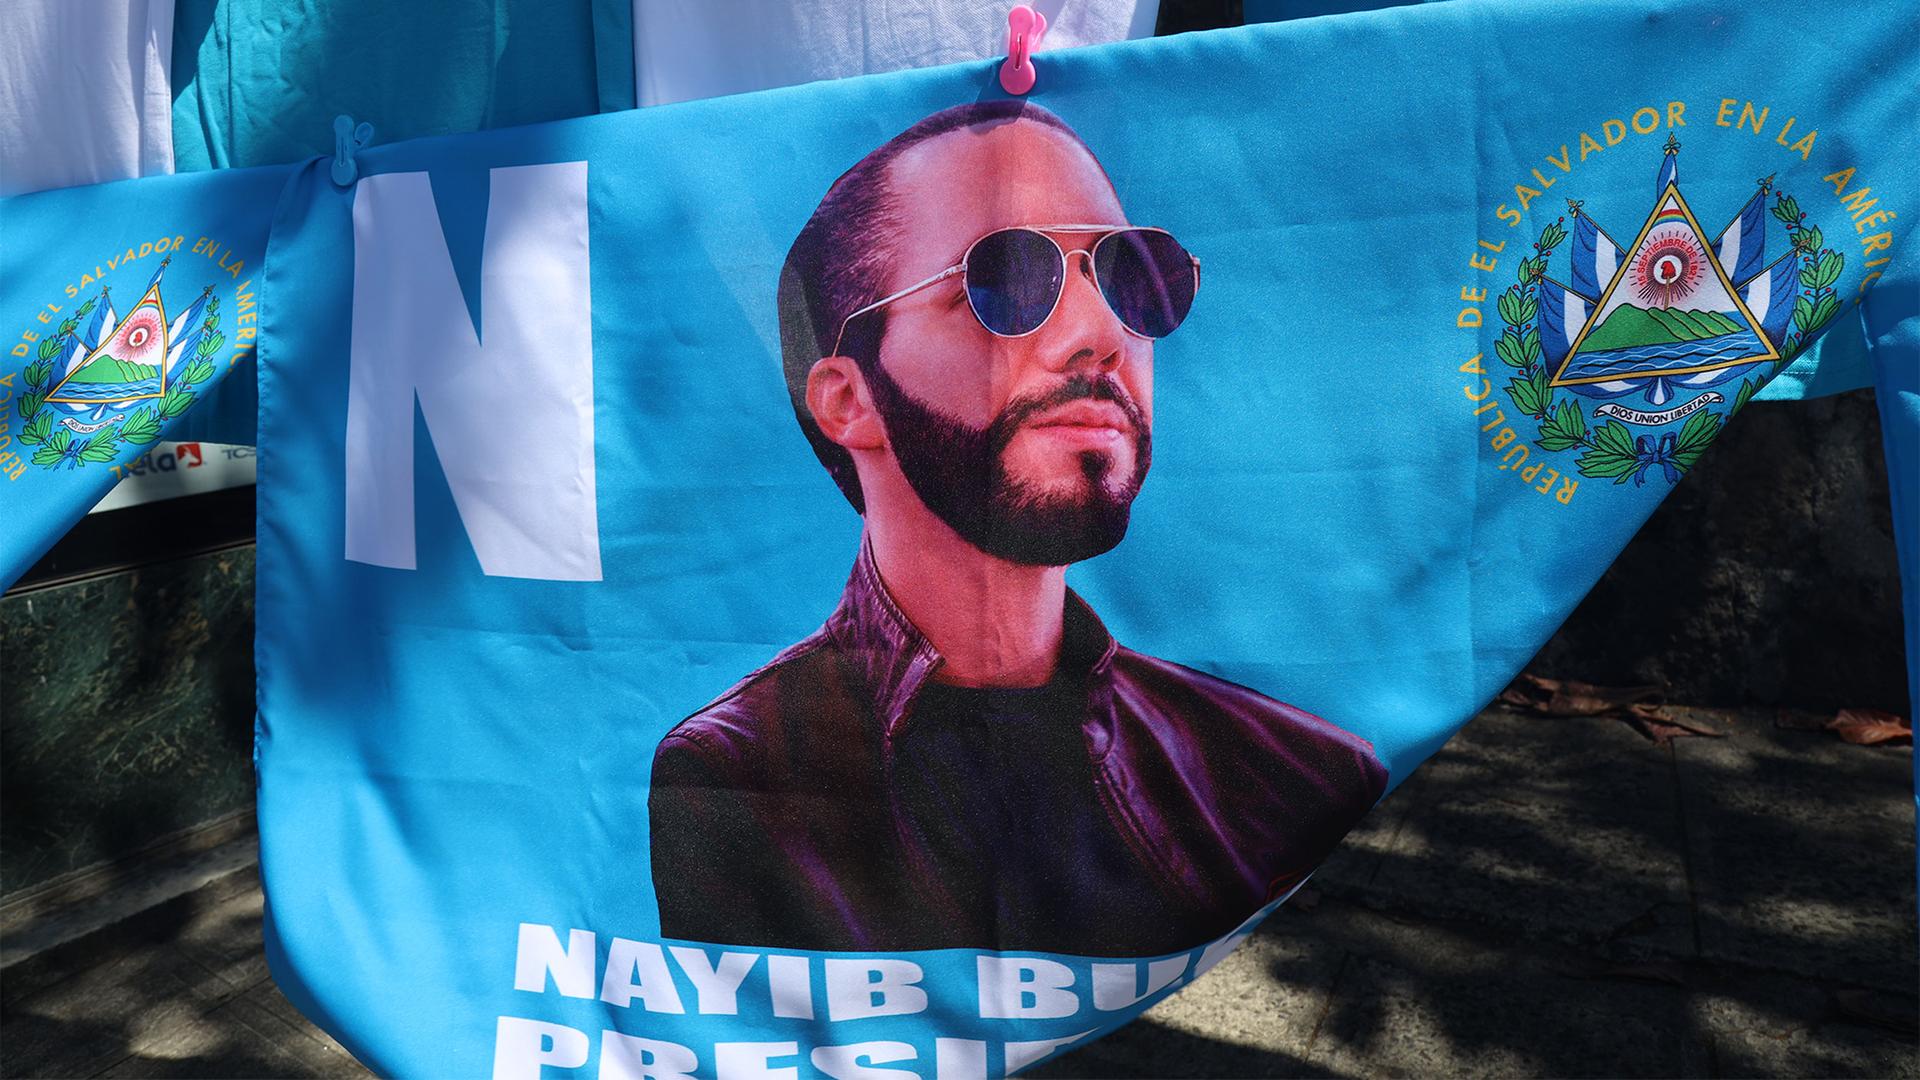 Vendors sell images of President Nayib Bukele during El Salvador's election campaign.